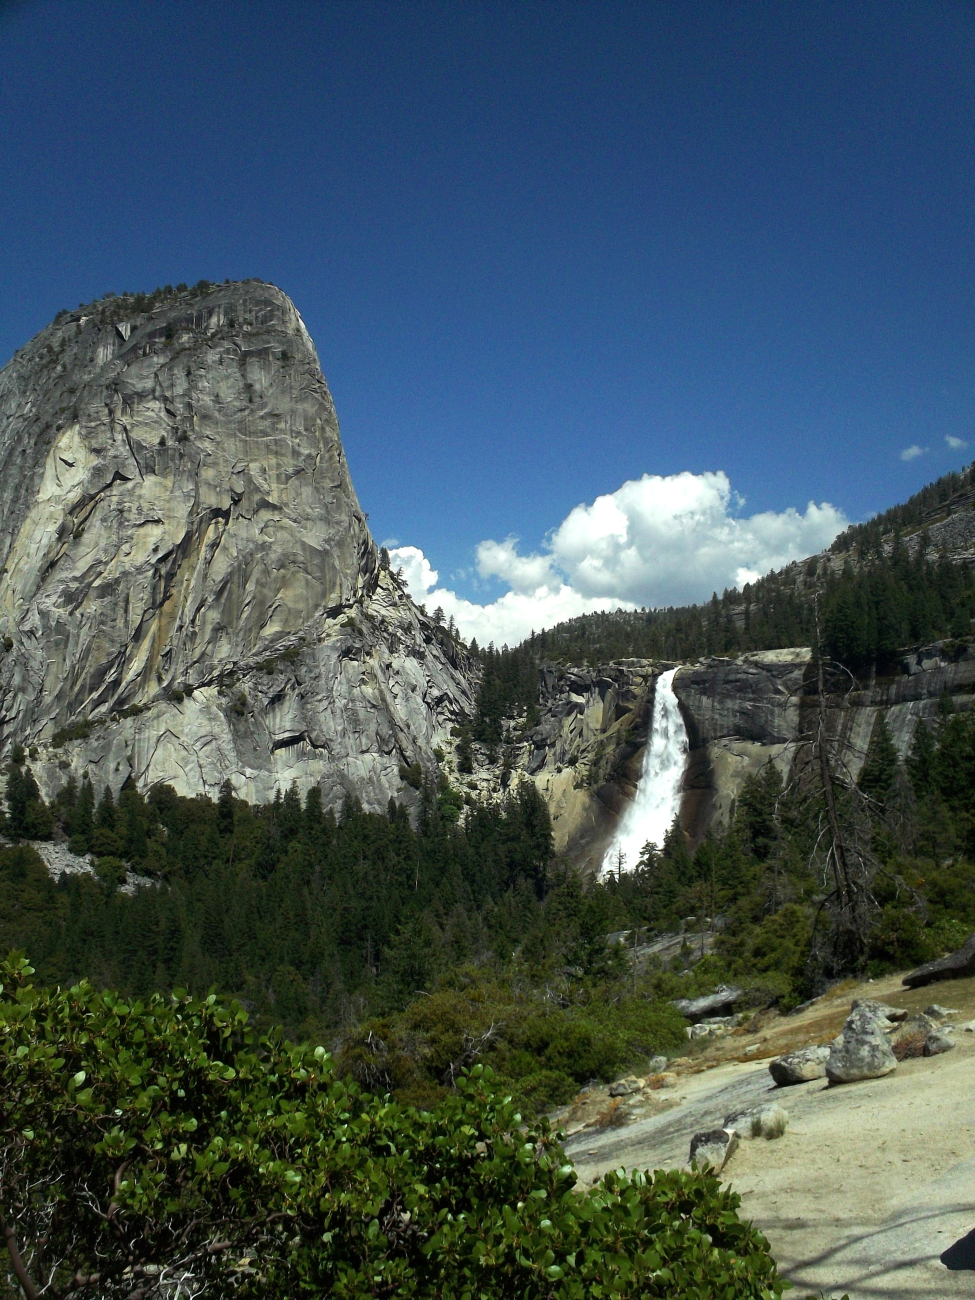 A view of Nevada Falls having a drop of 594 feet